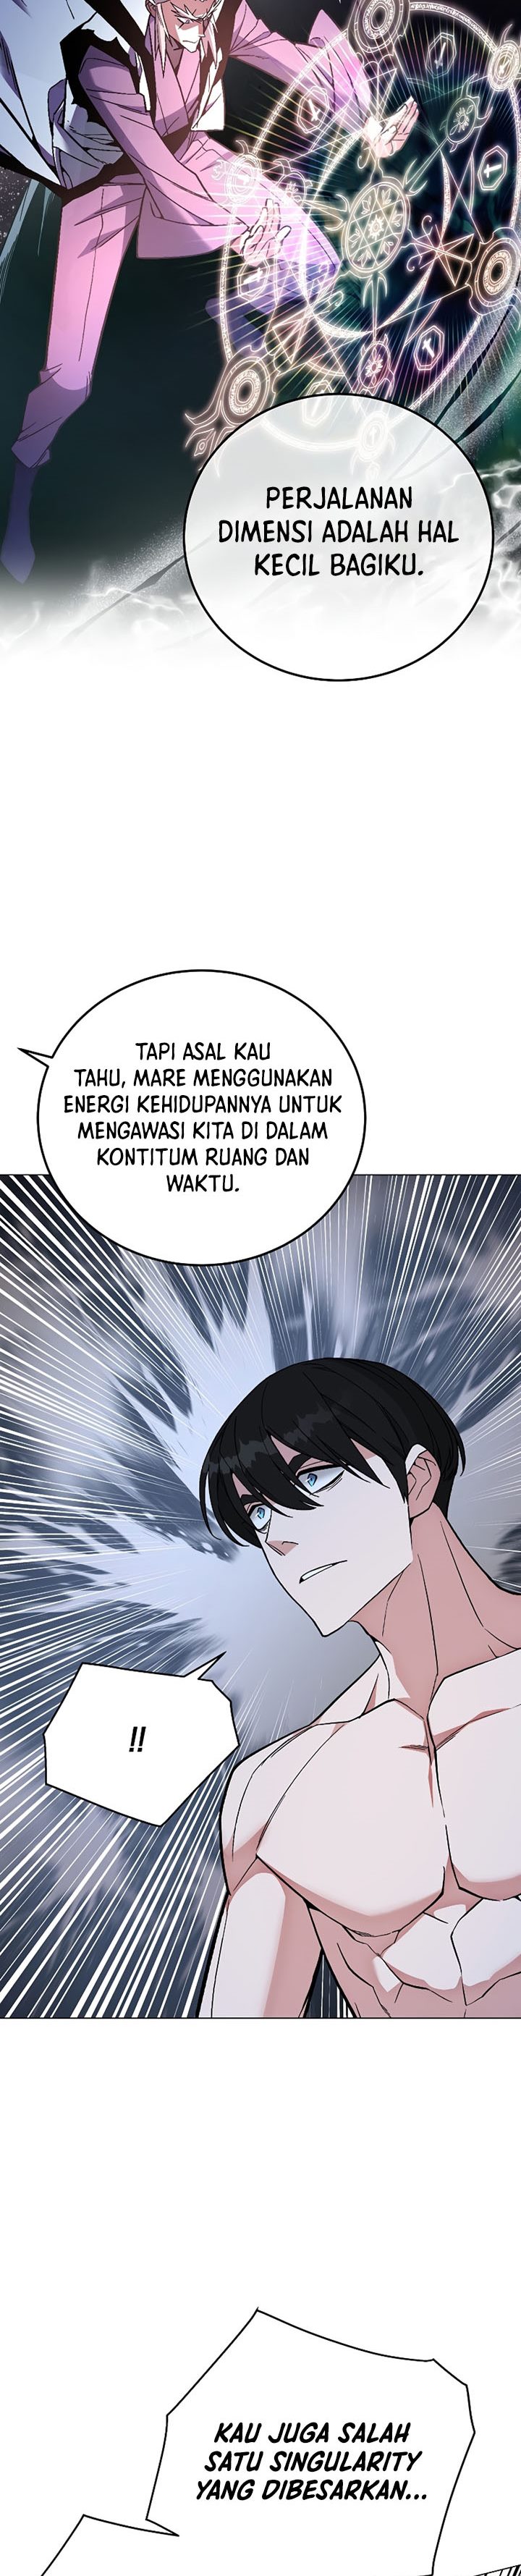 Heavenly Demon Instructor Chapter 92